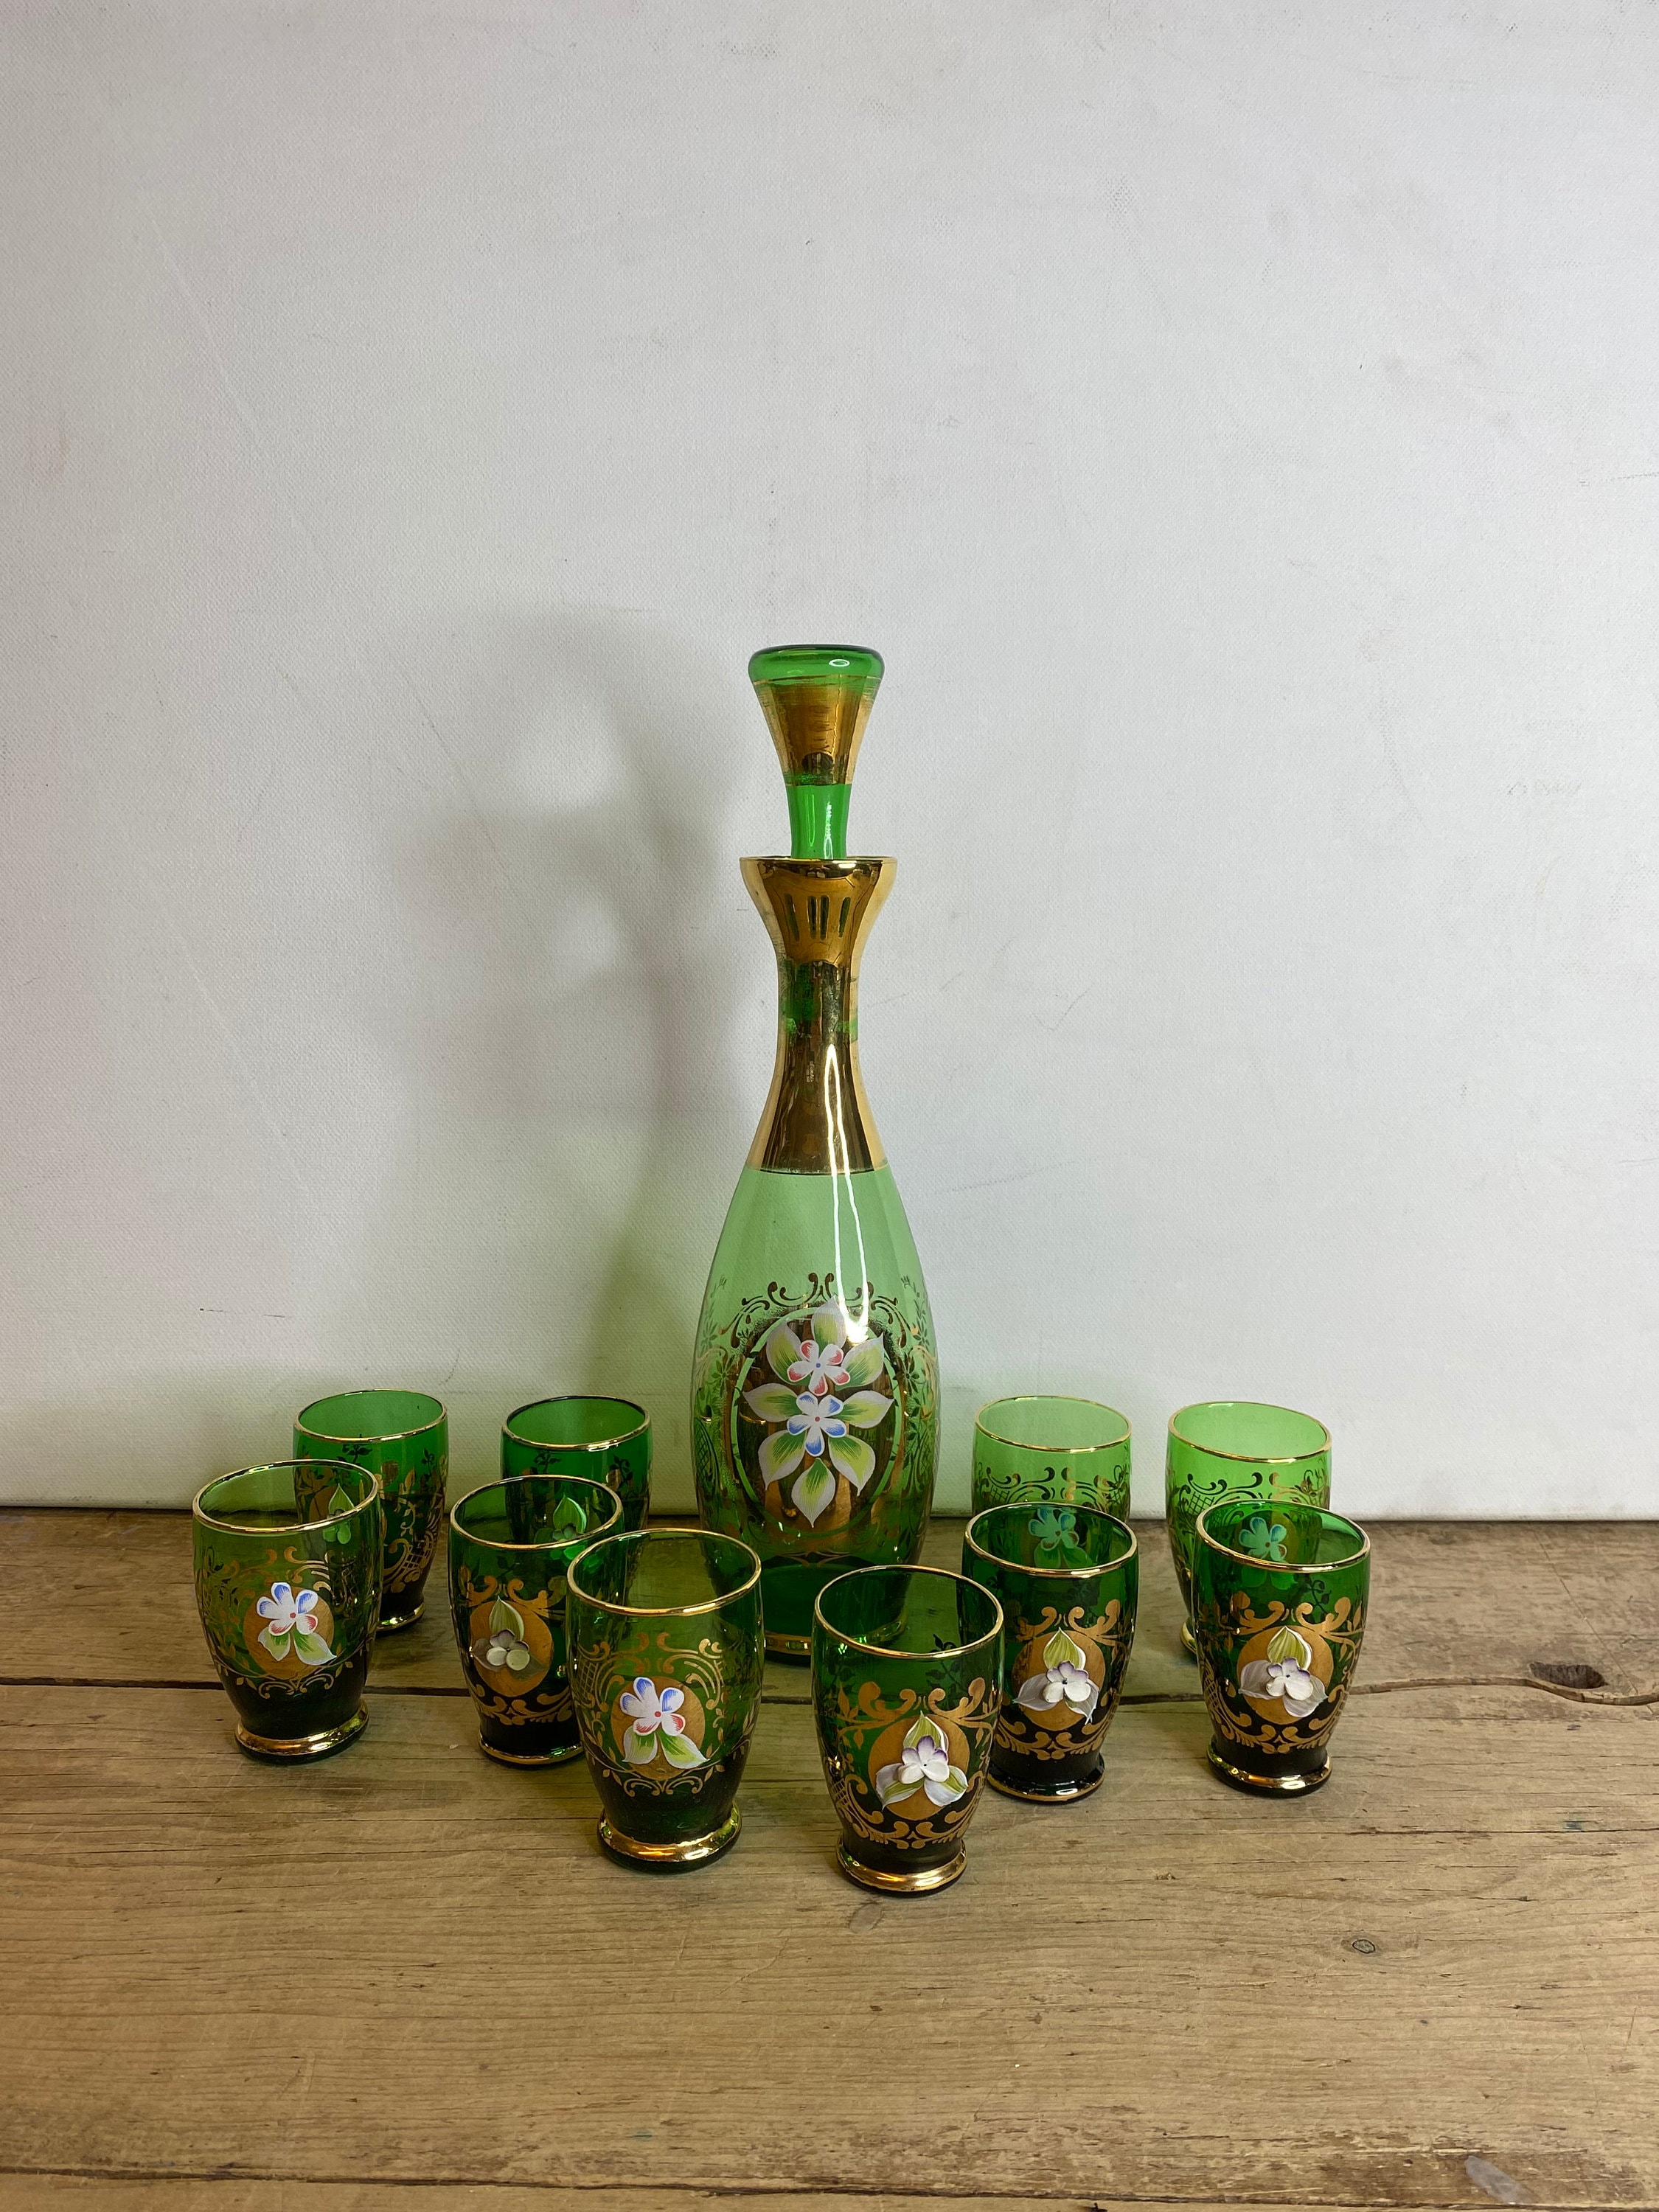 Vintage Czech Bohemian Art Glass Decanter Set Hand Painted Green & Gold  Decanter With 10 Matching Shot Glasses. in Good Condition -  Canada